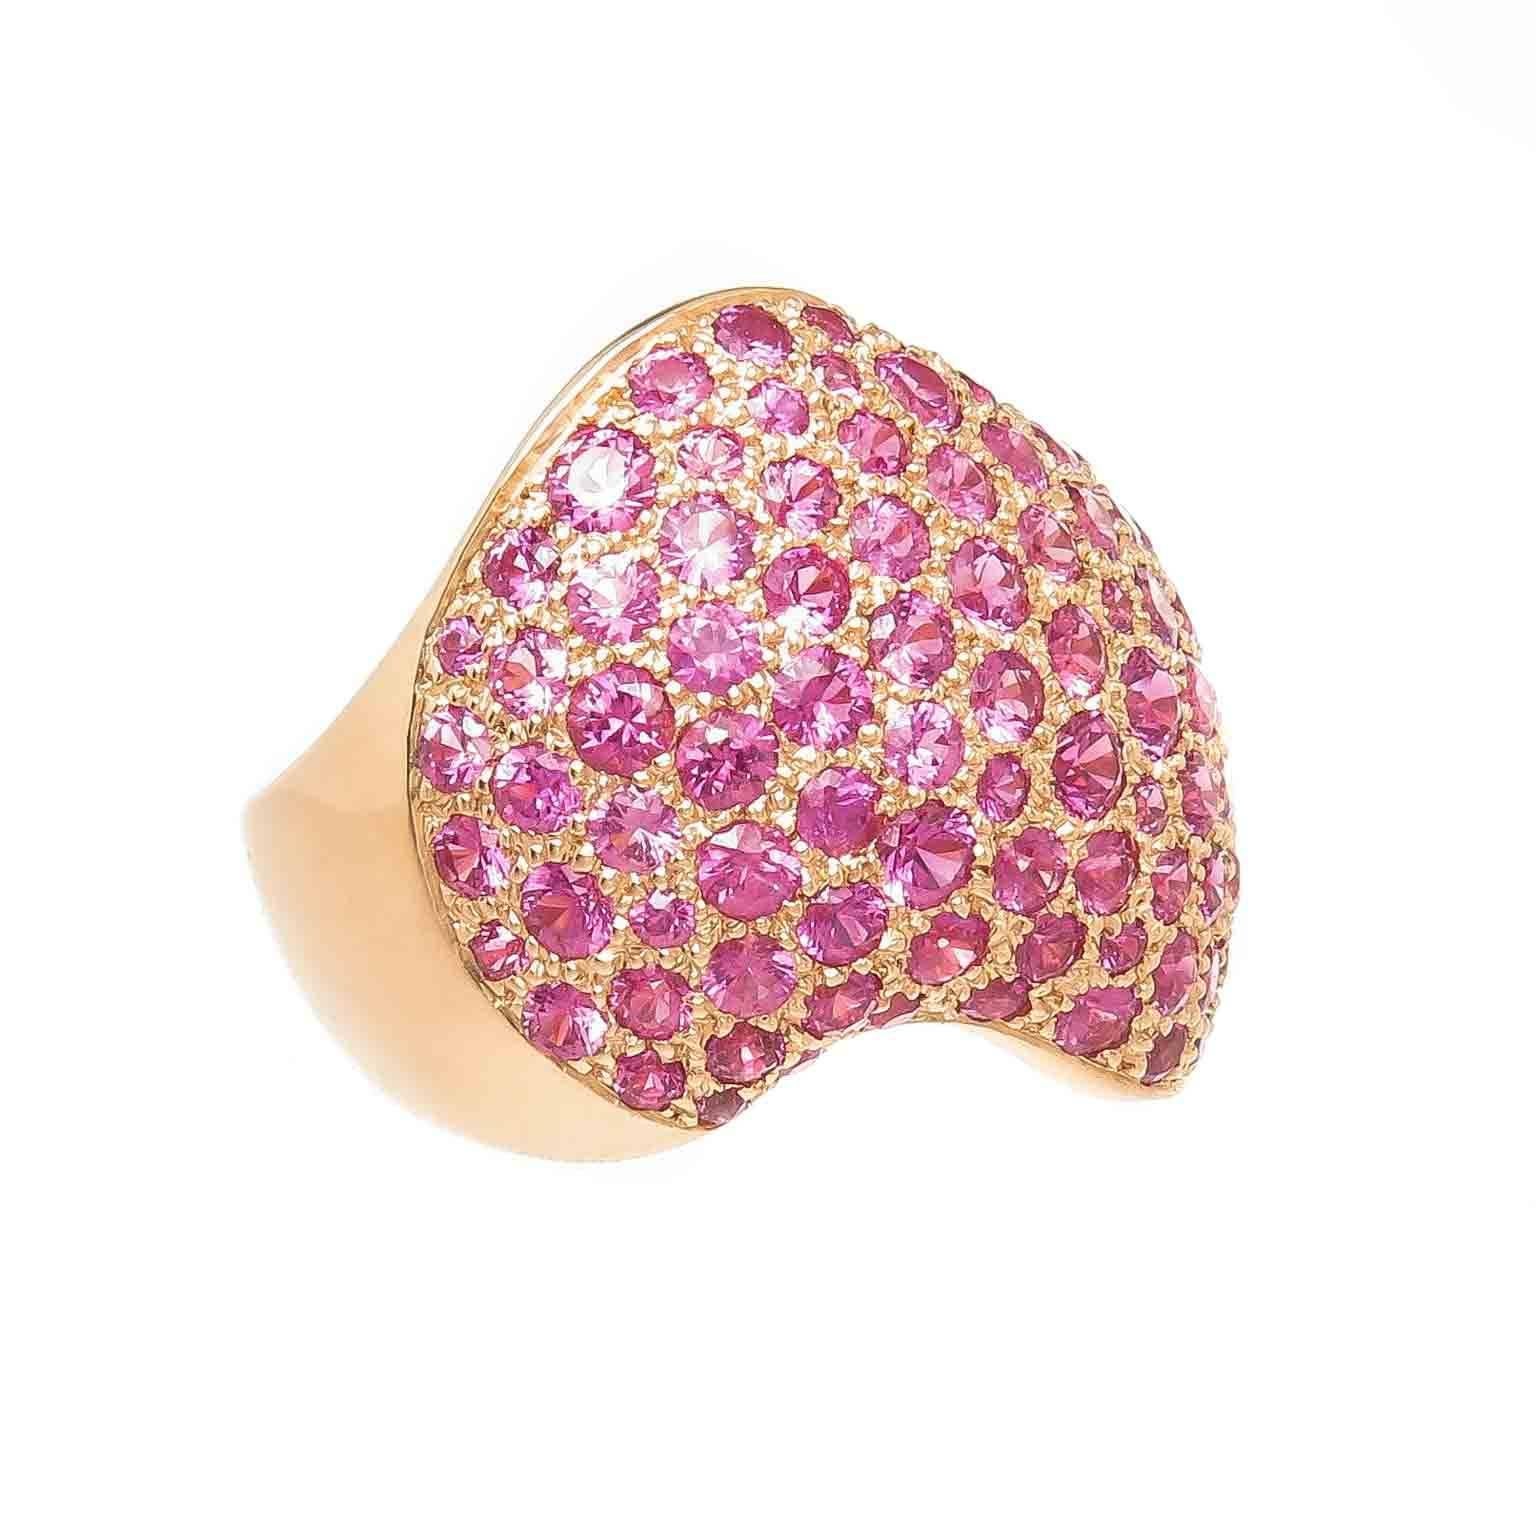 Circa 2005 Van Cleef and Arpels 18k yellow Gold Ring in a wave design and Pave set with Extremely Fine Color Pink Sapphire. The top of the Ring measures 1 inch in length and 1 inch wide. Finger size = 6 1/4. (52 European) Signed, Numbered and in